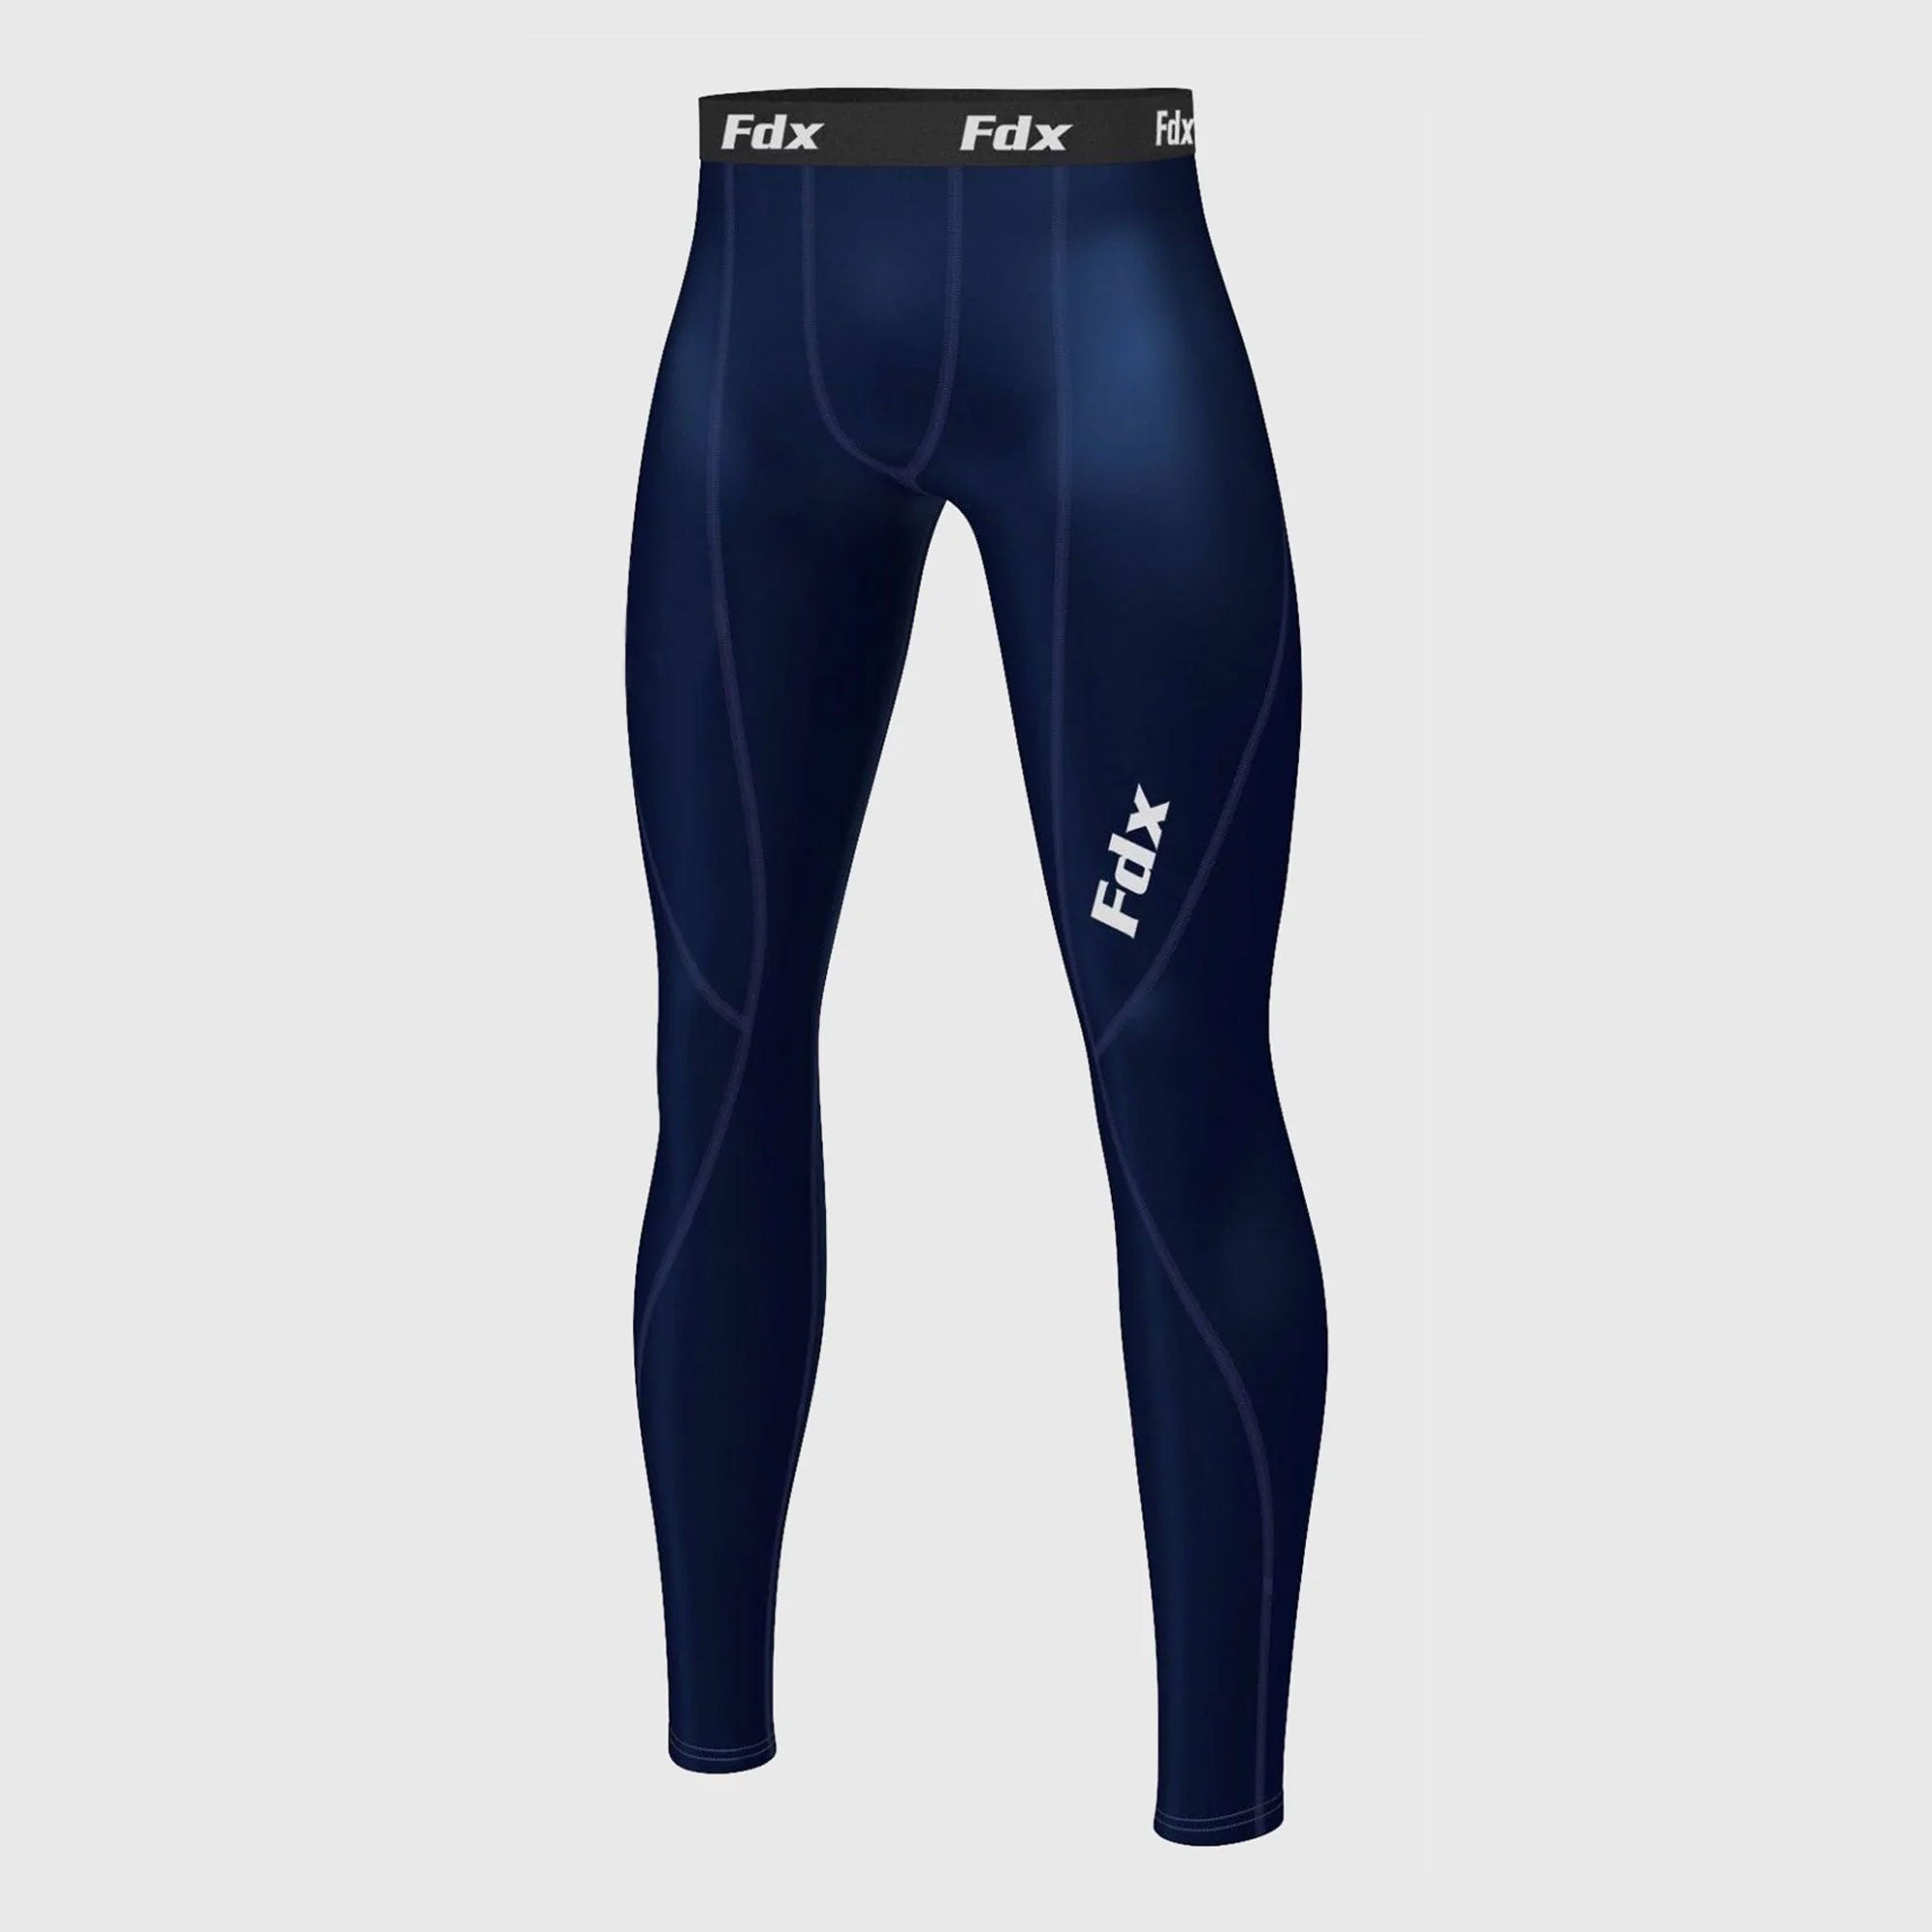 Fdx Navy Blue Compression Tights Leggings Gym Workout Running Athletic Yoga Elastic Waistband Strechable Breathable Training Jogging Pants - Thermolinx